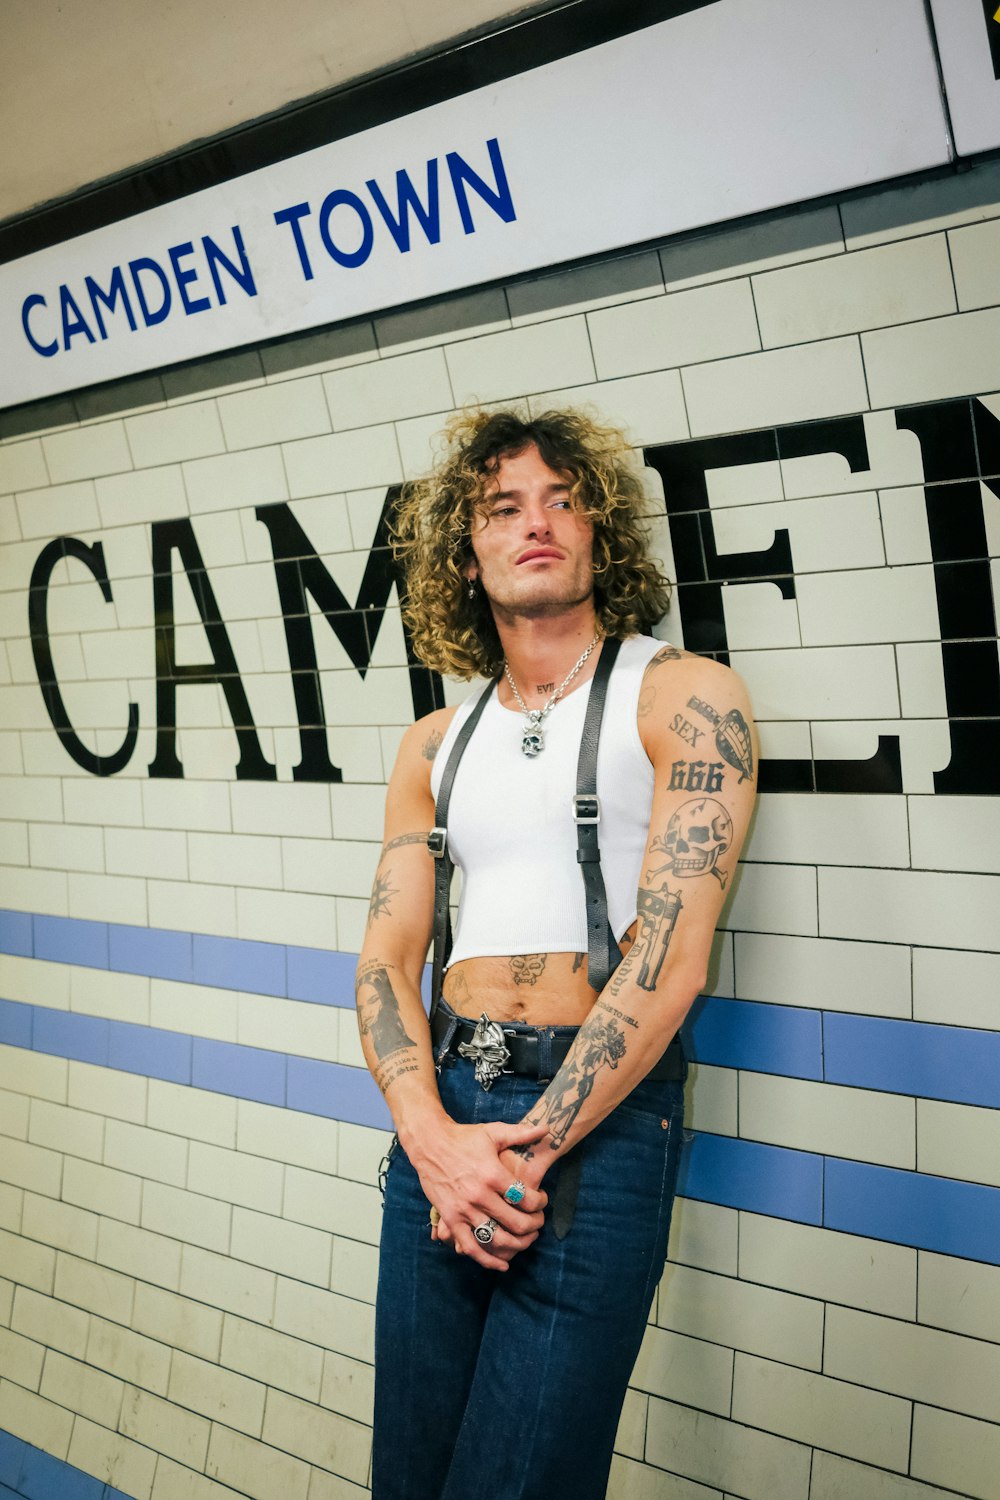 a man with tattoos standing in front of a sign